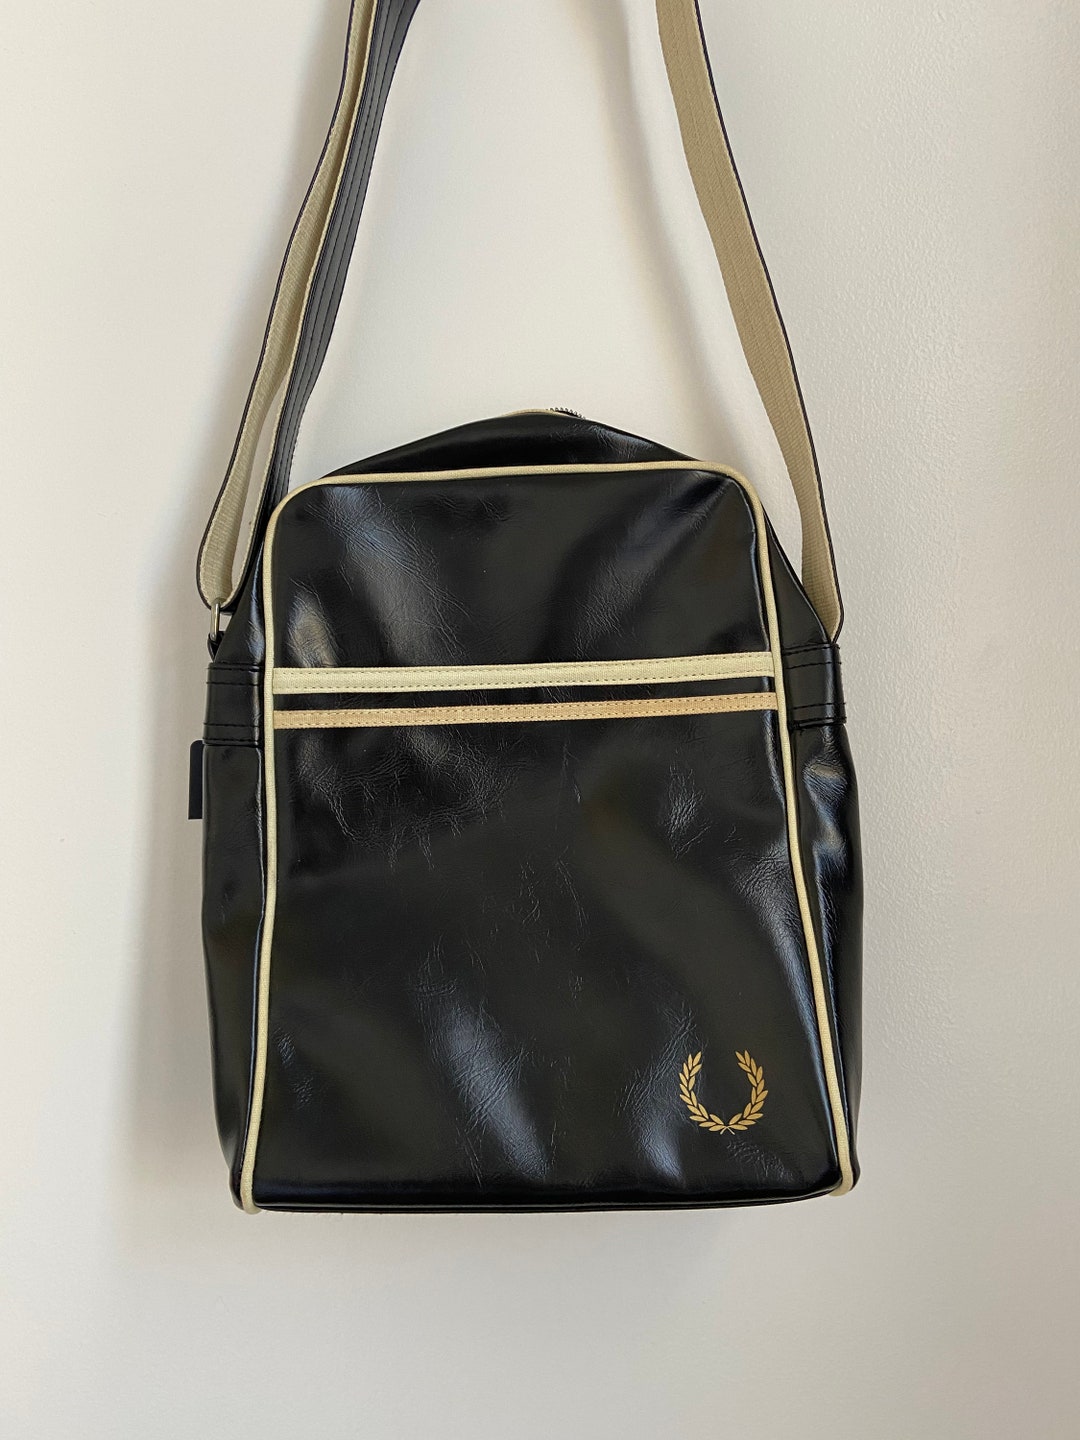 Vintage Fred Perry Cross Body Bag Black - Etsy